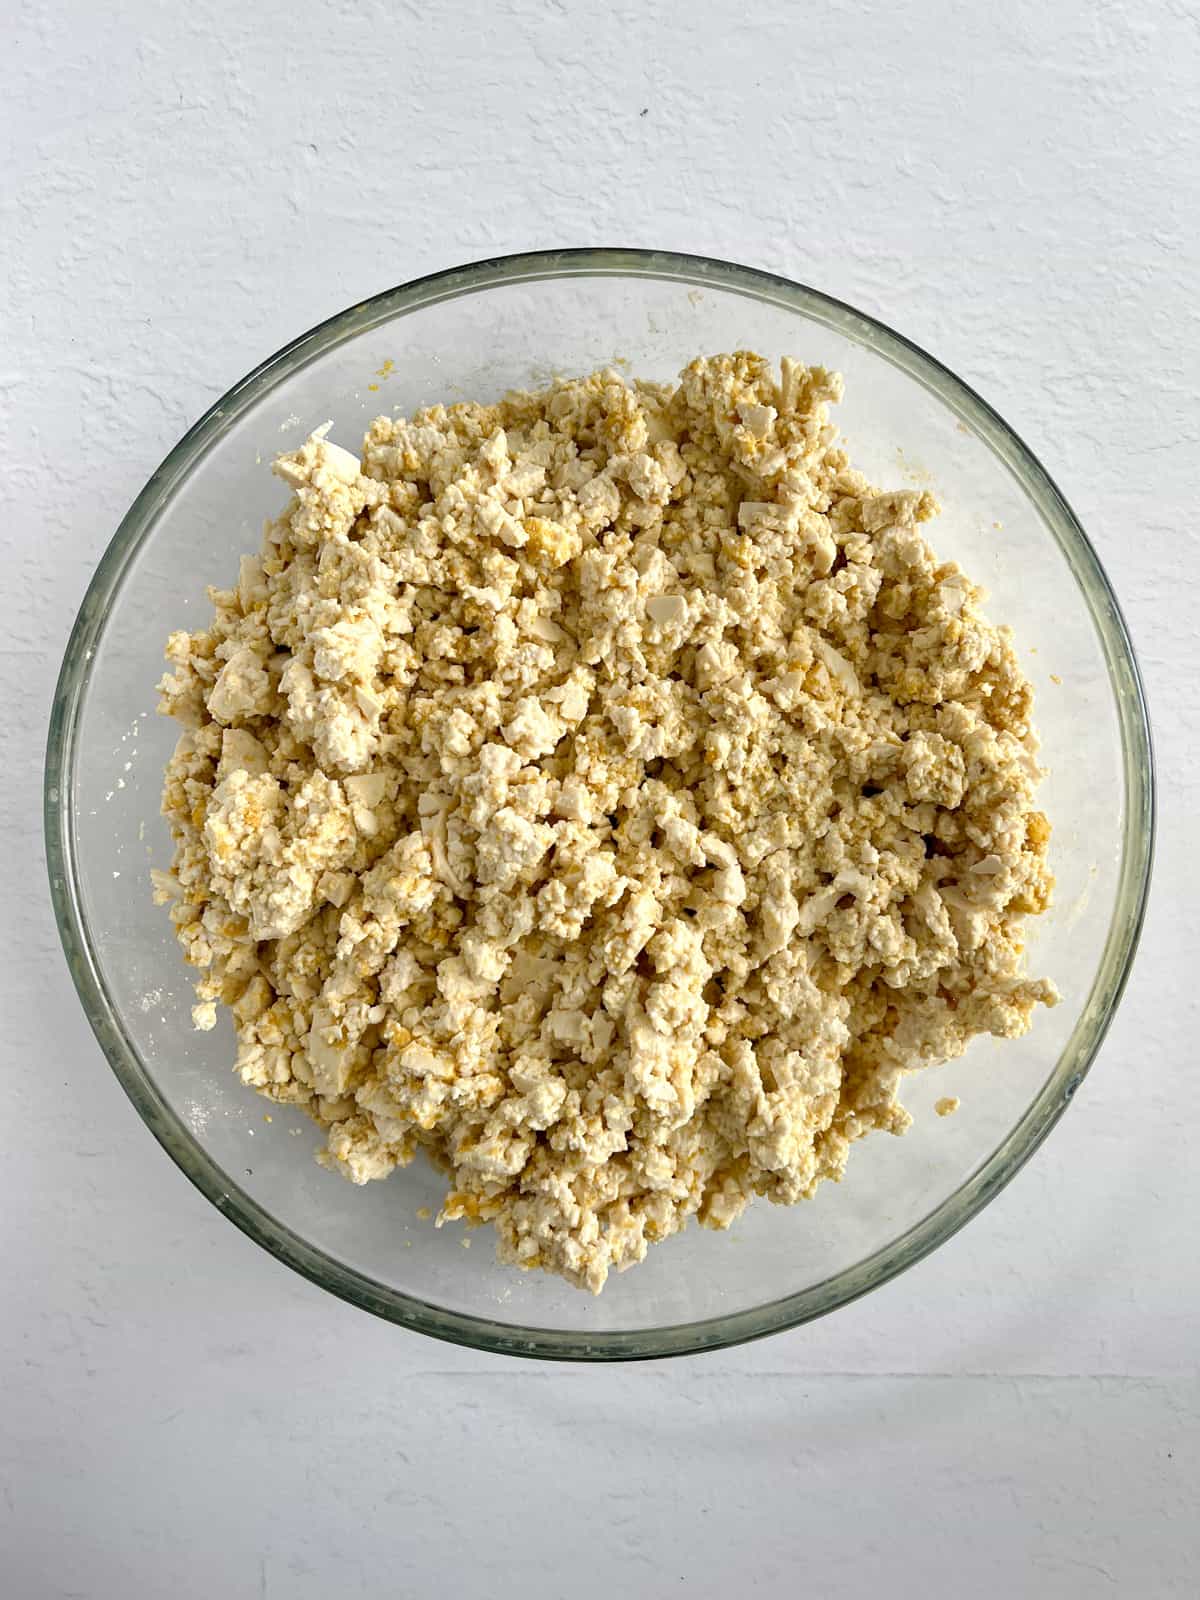 crumbled tofu with yellow seasoning on it in a glass bowl